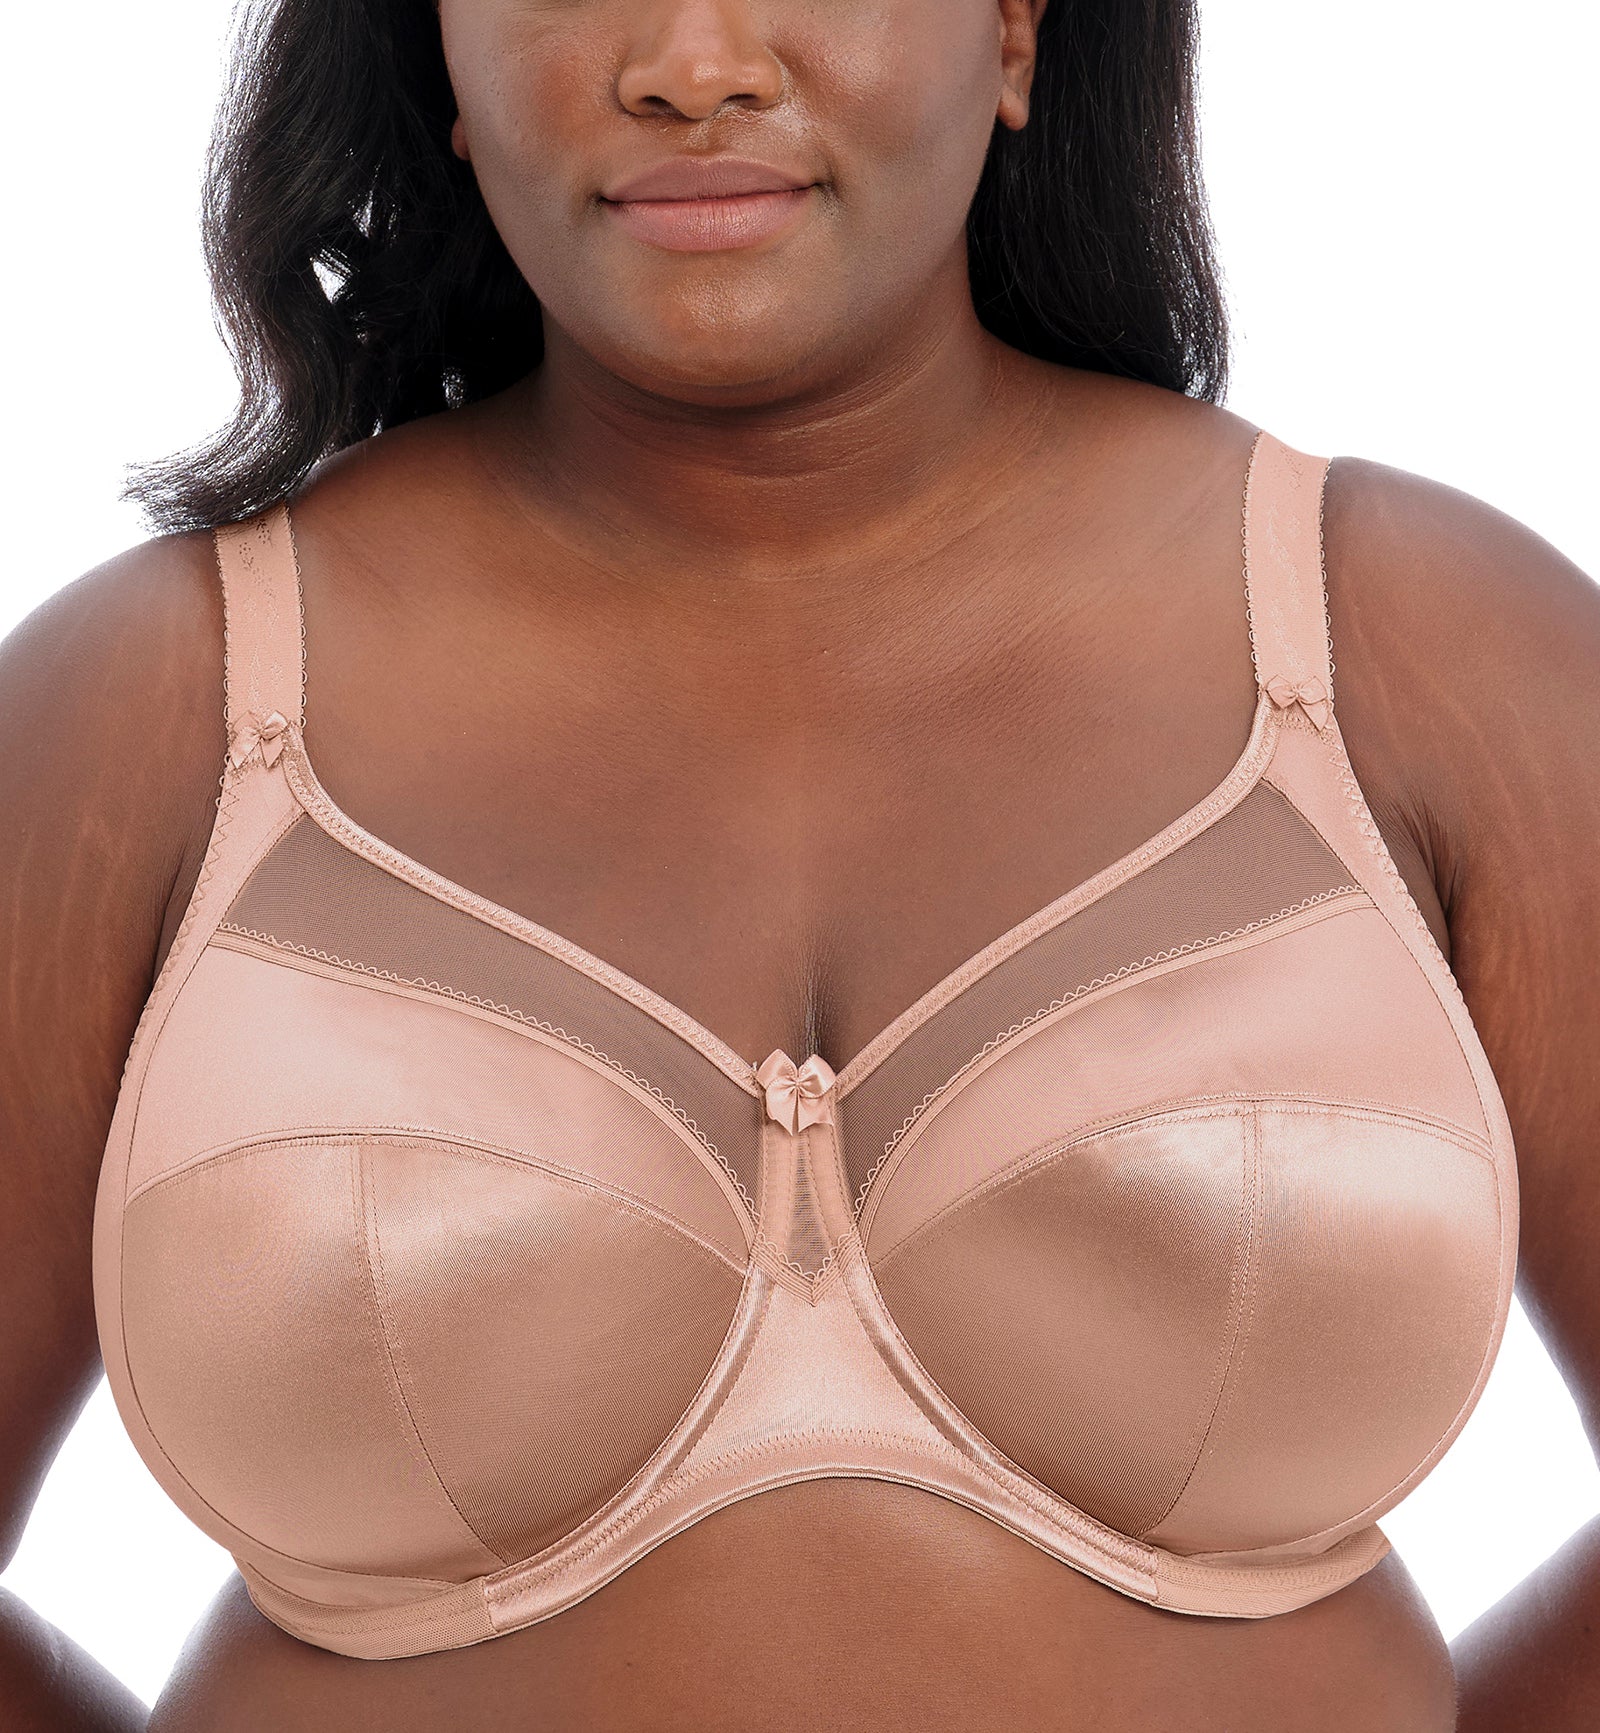 Goddess Keira Support Underwire Bra (6090),34I,Fawn - Fawn,34I